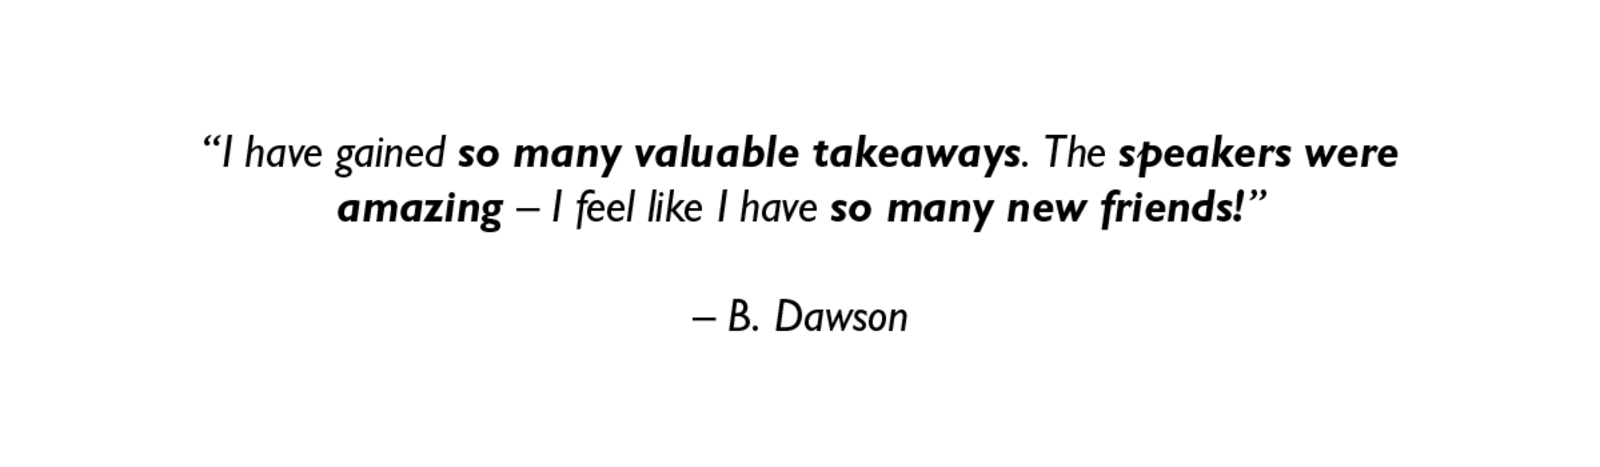 "I have gained so many valuable takeaways. The speakers were amazing - I feel like I have so many new friends!" - B. Dawson